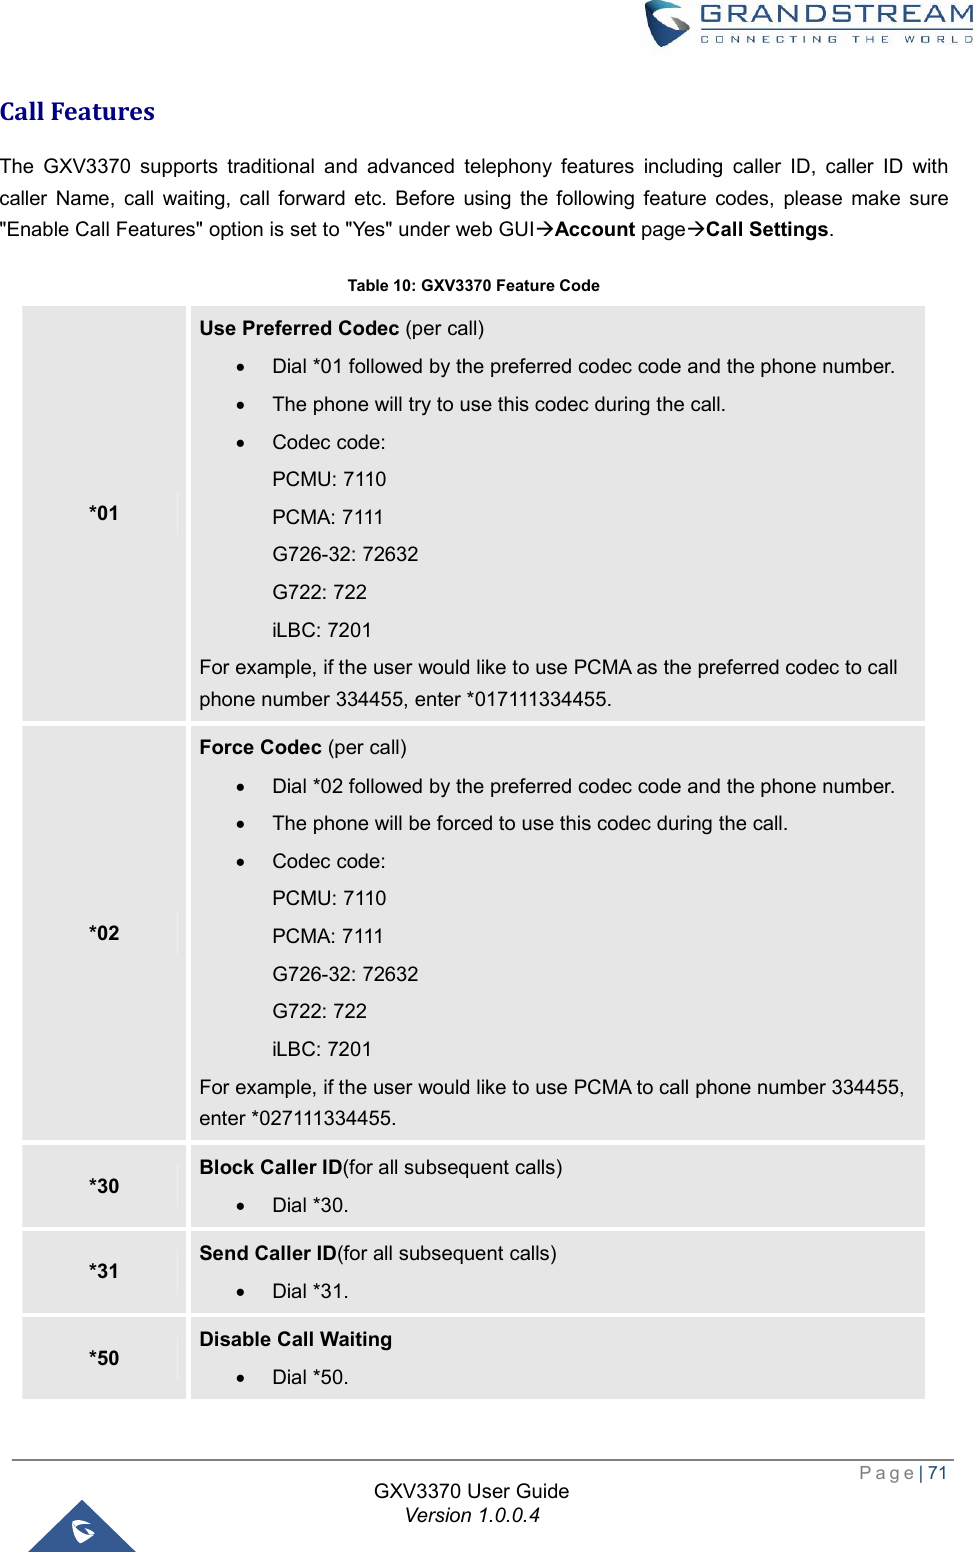  Page| 71  GXV3370 User Guide Version 1.0.0.4  Call Features The GXV3370 supports traditional and advanced telephony features including caller ID, caller ID with caller Name, call waiting, call forward etc. Before using the following feature codes, please make sure &quot;Enable Call Features&quot; option is set to &quot;Yes&quot; under web GUIàAccount pageàCall Settings. Table 10: GXV3370 Feature Code *01 Use Preferred Codec (per call) · Dial *01 followed by the preferred codec code and the phone number. · The phone will try to use this codec during the call. · Codec code: PCMU: 7110 PCMA: 7111 G726-32: 72632 G722: 722 iLBC: 7201 For example, if the user would like to use PCMA as the preferred codec to call phone number 334455, enter *017111334455. *02 Force Codec (per call) · Dial *02 followed by the preferred codec code and the phone number. · The phone will be forced to use this codec during the call. · Codec code: PCMU: 7110 PCMA: 7111 G726-32: 72632 G722: 722 iLBC: 7201 For example, if the user would like to use PCMA to call phone number 334455, enter *027111334455. *30  Block Caller ID(for all subsequent calls) · Dial *30. *31  Send Caller ID(for all subsequent calls) · Dial *31. *50  Disable Call Waiting · Dial *50. 